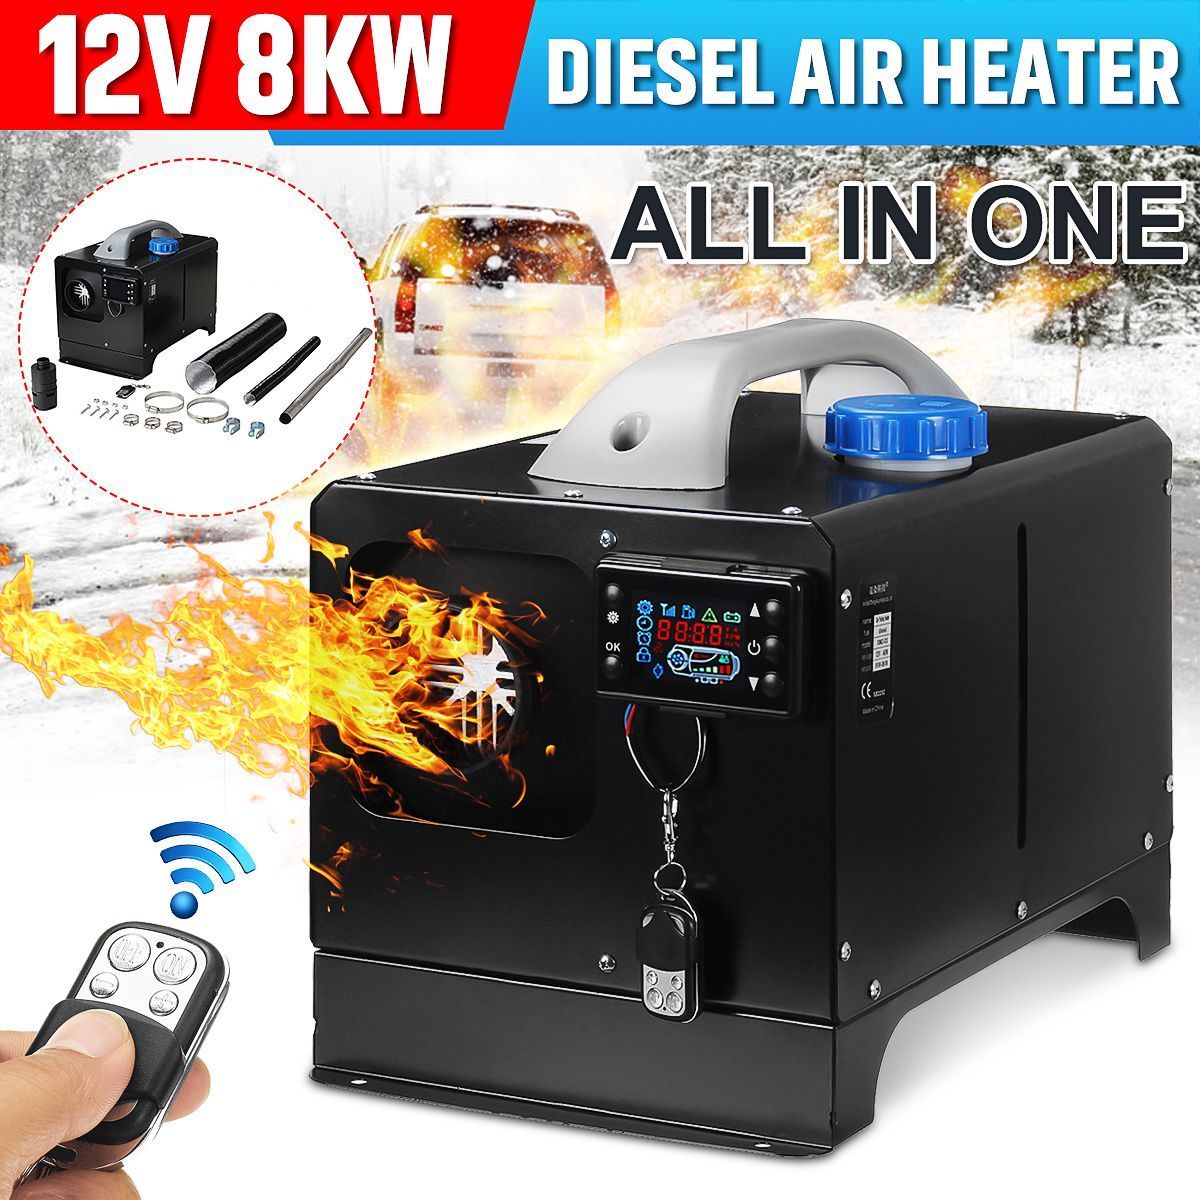 12V-8KW-All-In-One-Metal-Diesel-Air-Heater-Car-Parking-Heater-For-Trucks-Boat-1591345